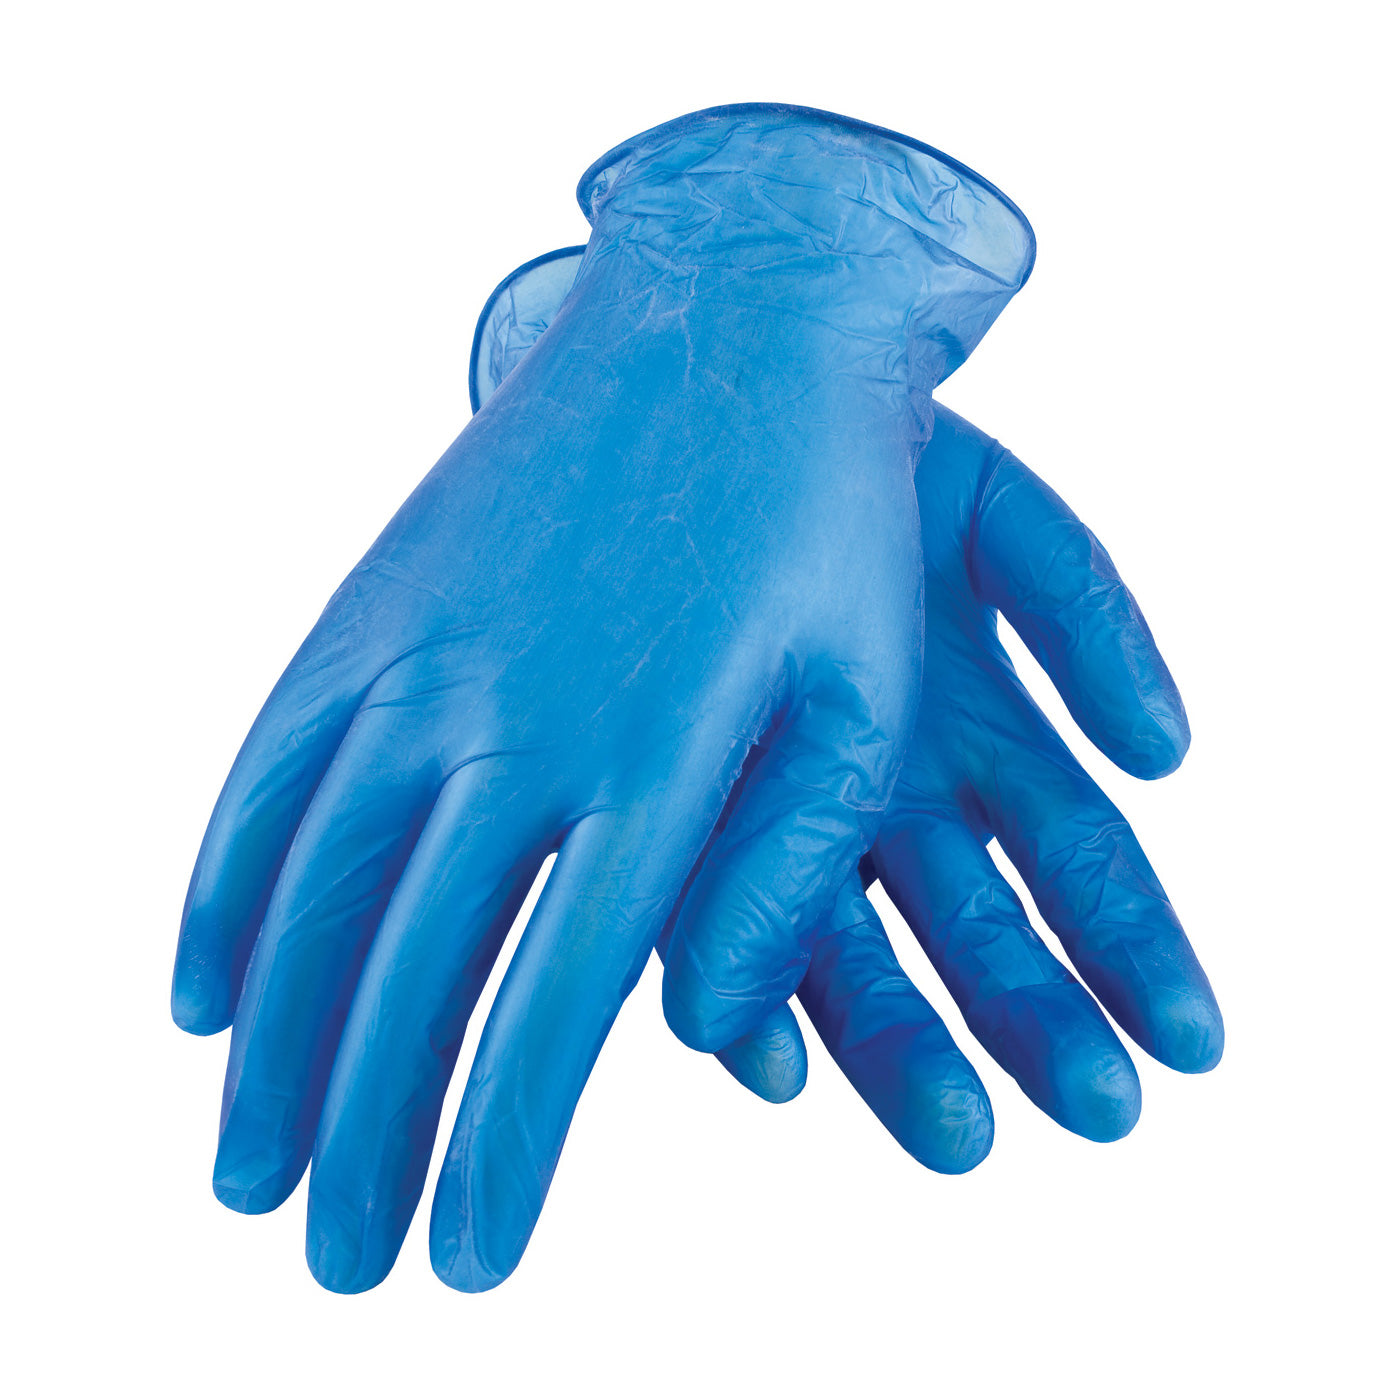 Ambi-dex 64-V77B/L Industrial Grade Disposable Vinyl Glove, Powdered - 5 Mil- Discontinued- Limited Quantities available